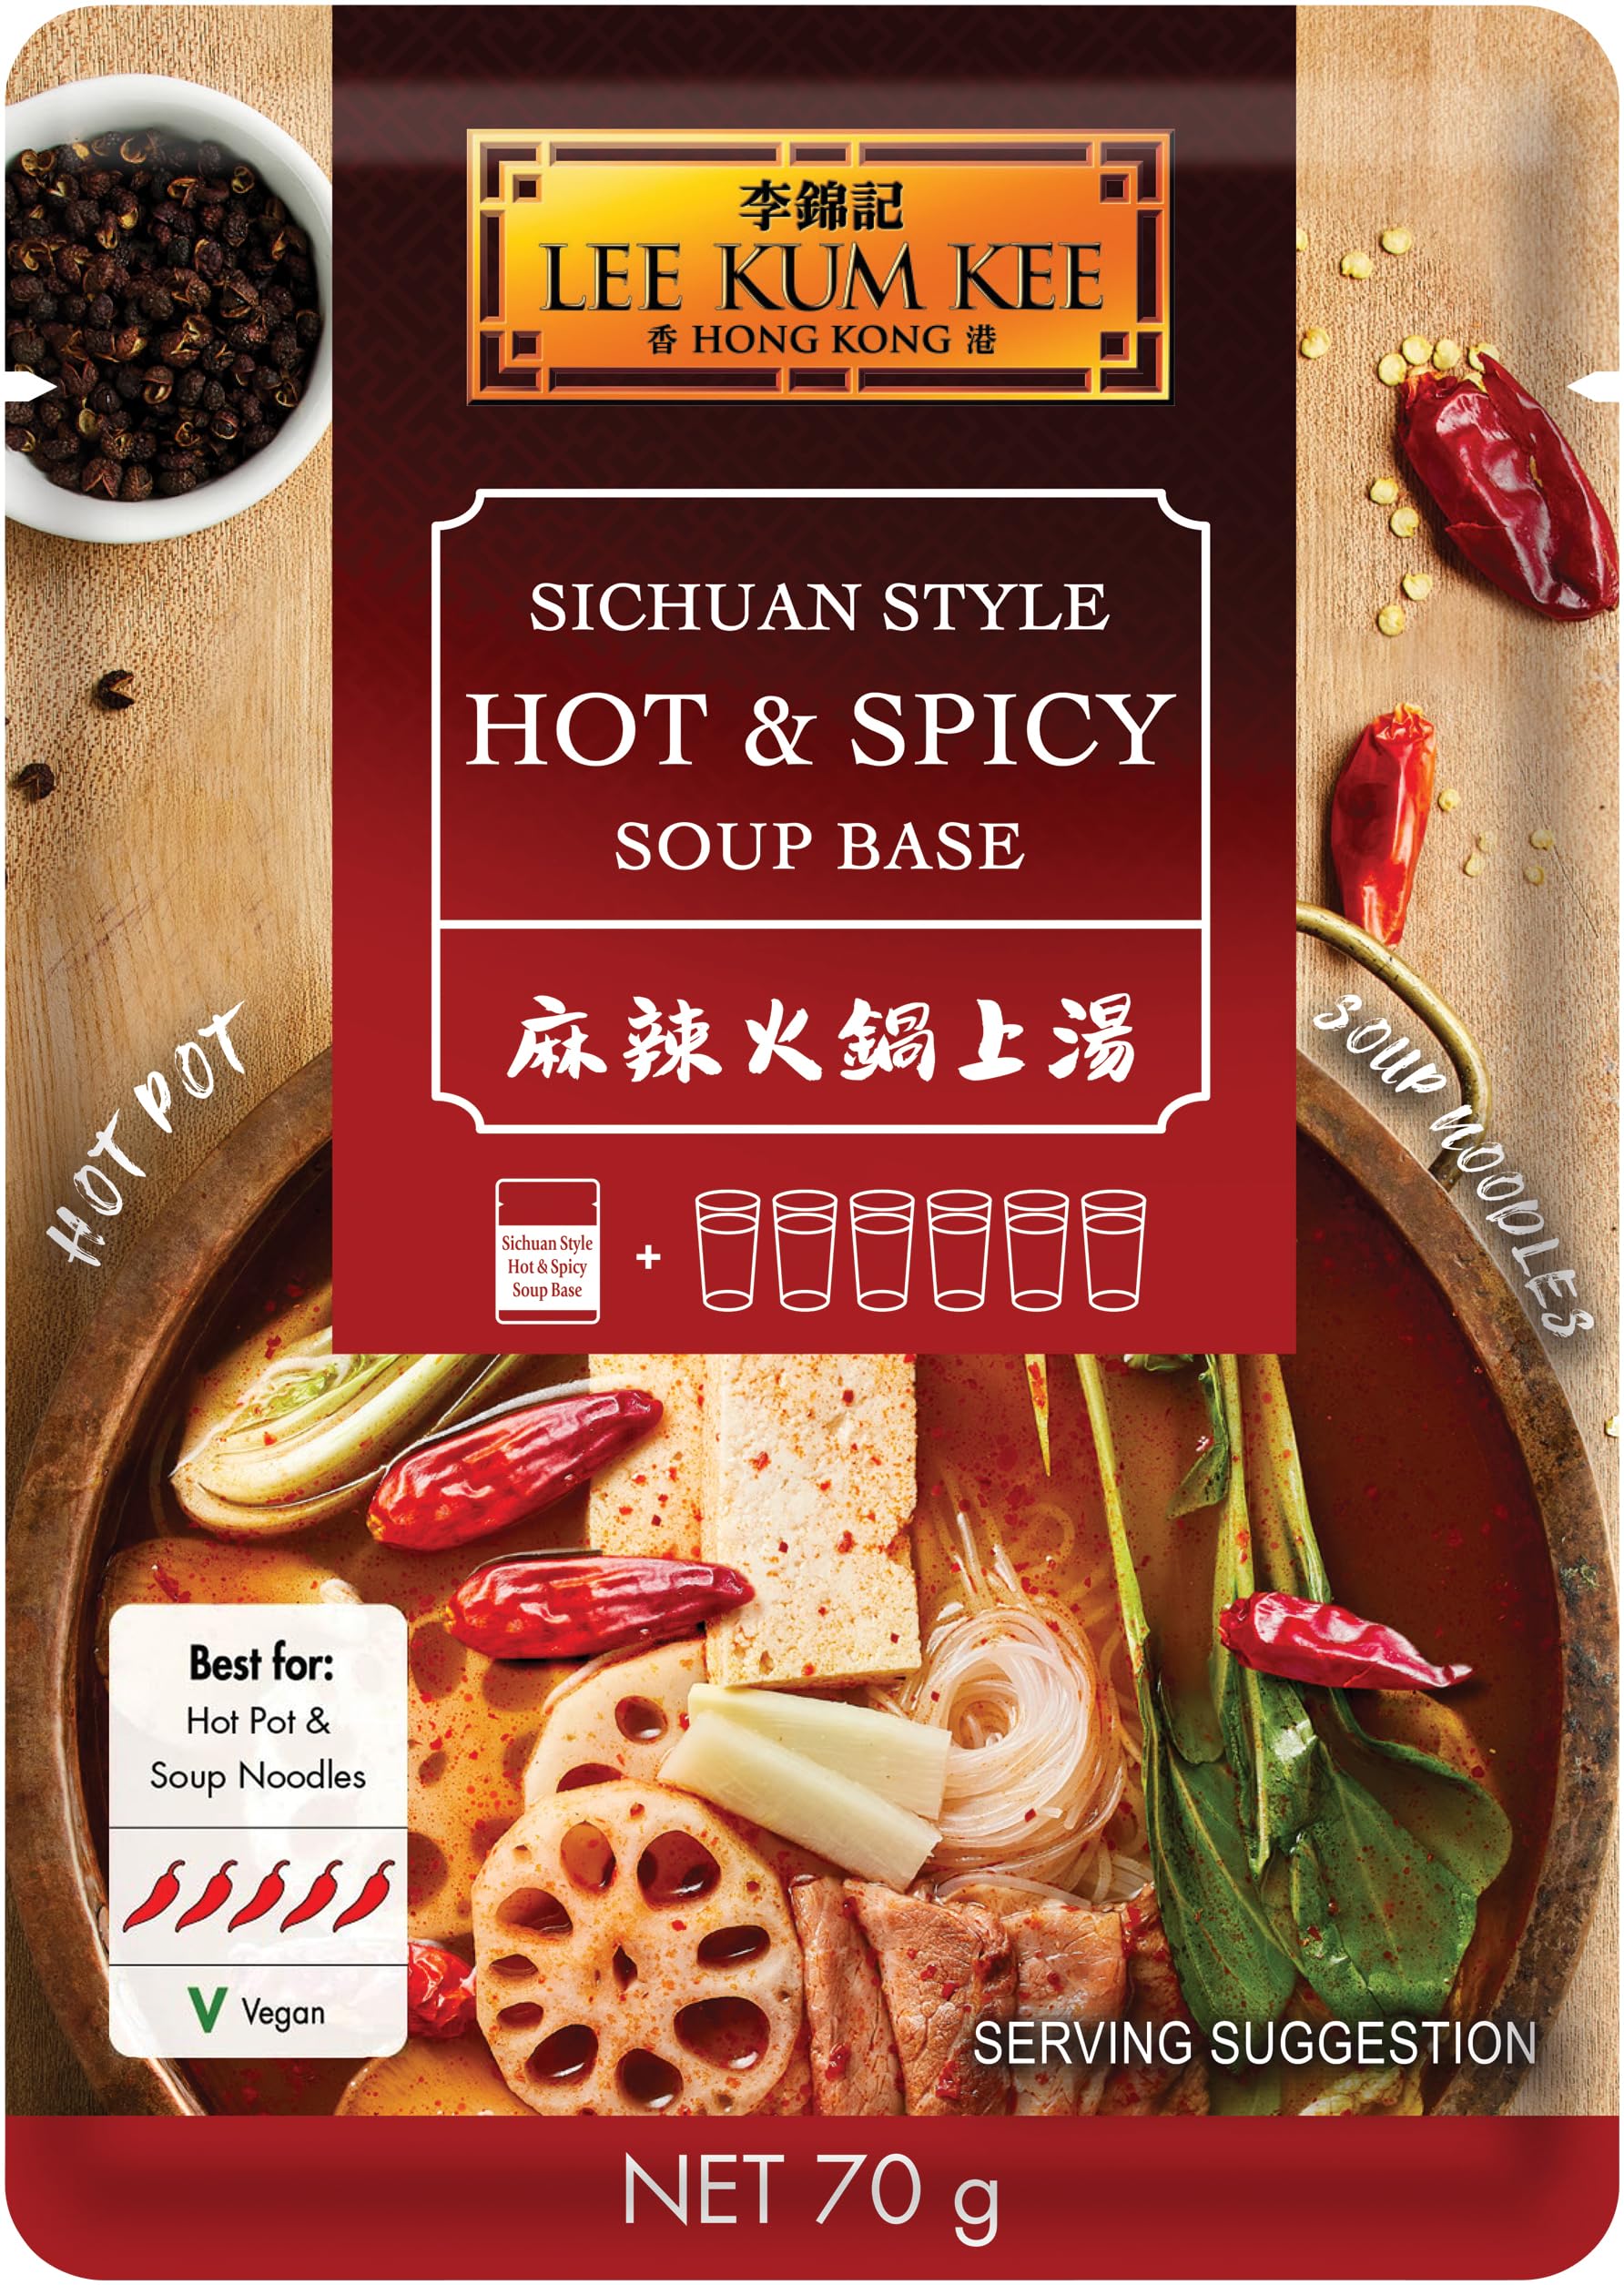 Lee Kum Kee Soup Base for Sichuan Hot and Spicy Hot Pot, 2.5 Ounce